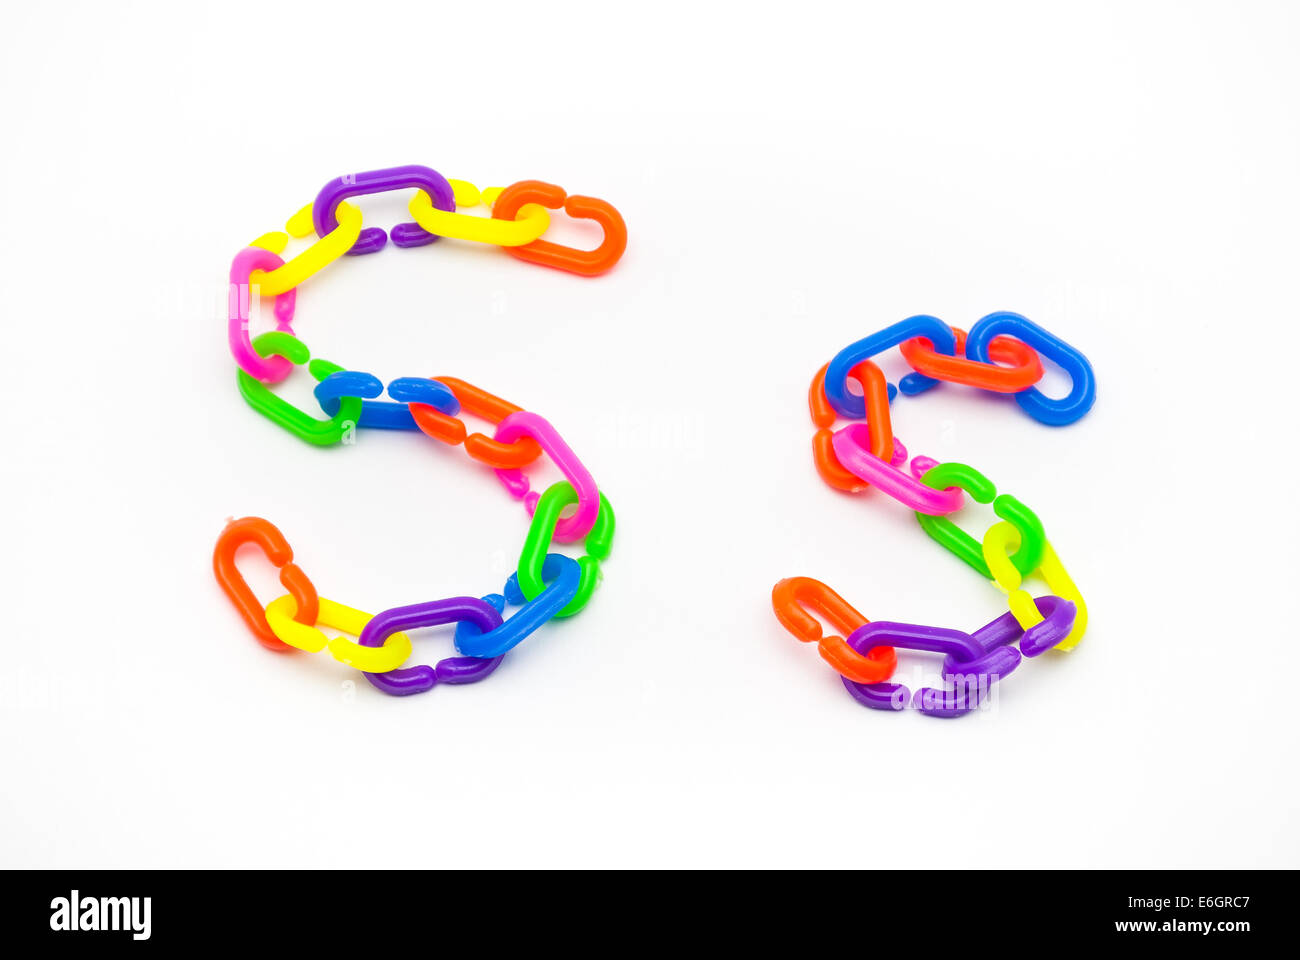 S and s Alphabet, Created by Colorful Plastic Chain. Stock Photo